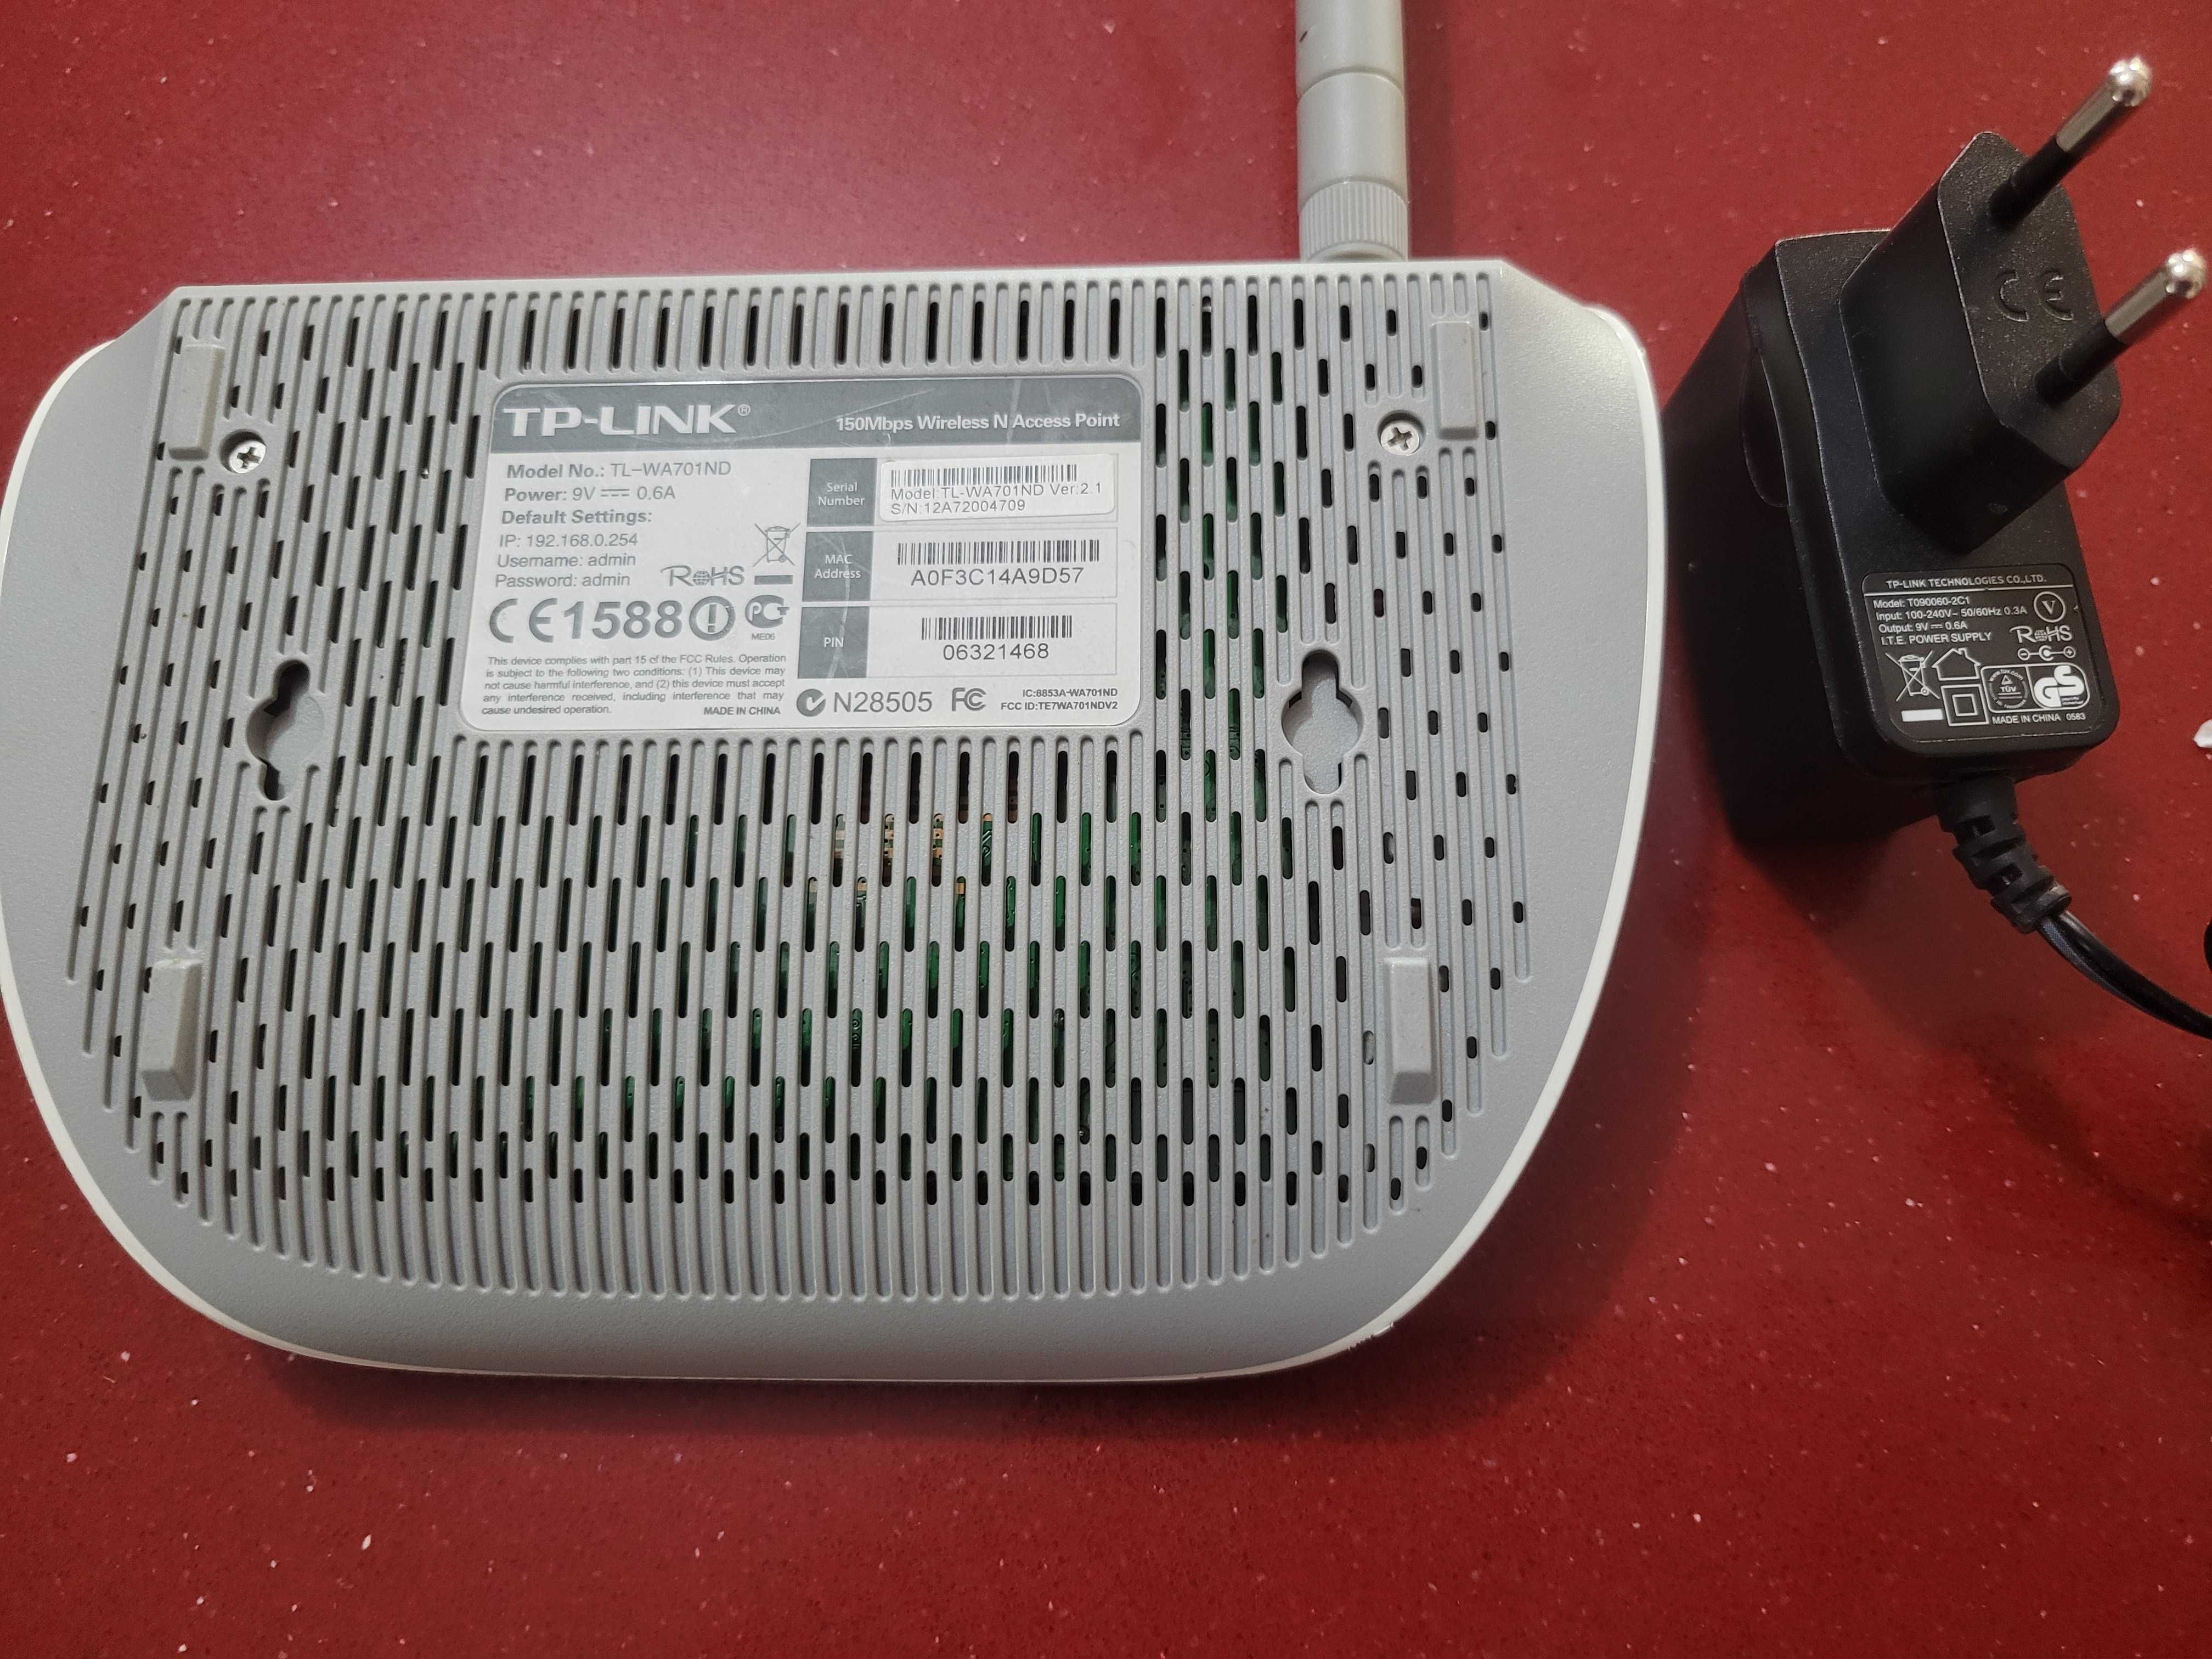 Access Point Wireless TL-WA701ND 150Mbps TP-Link